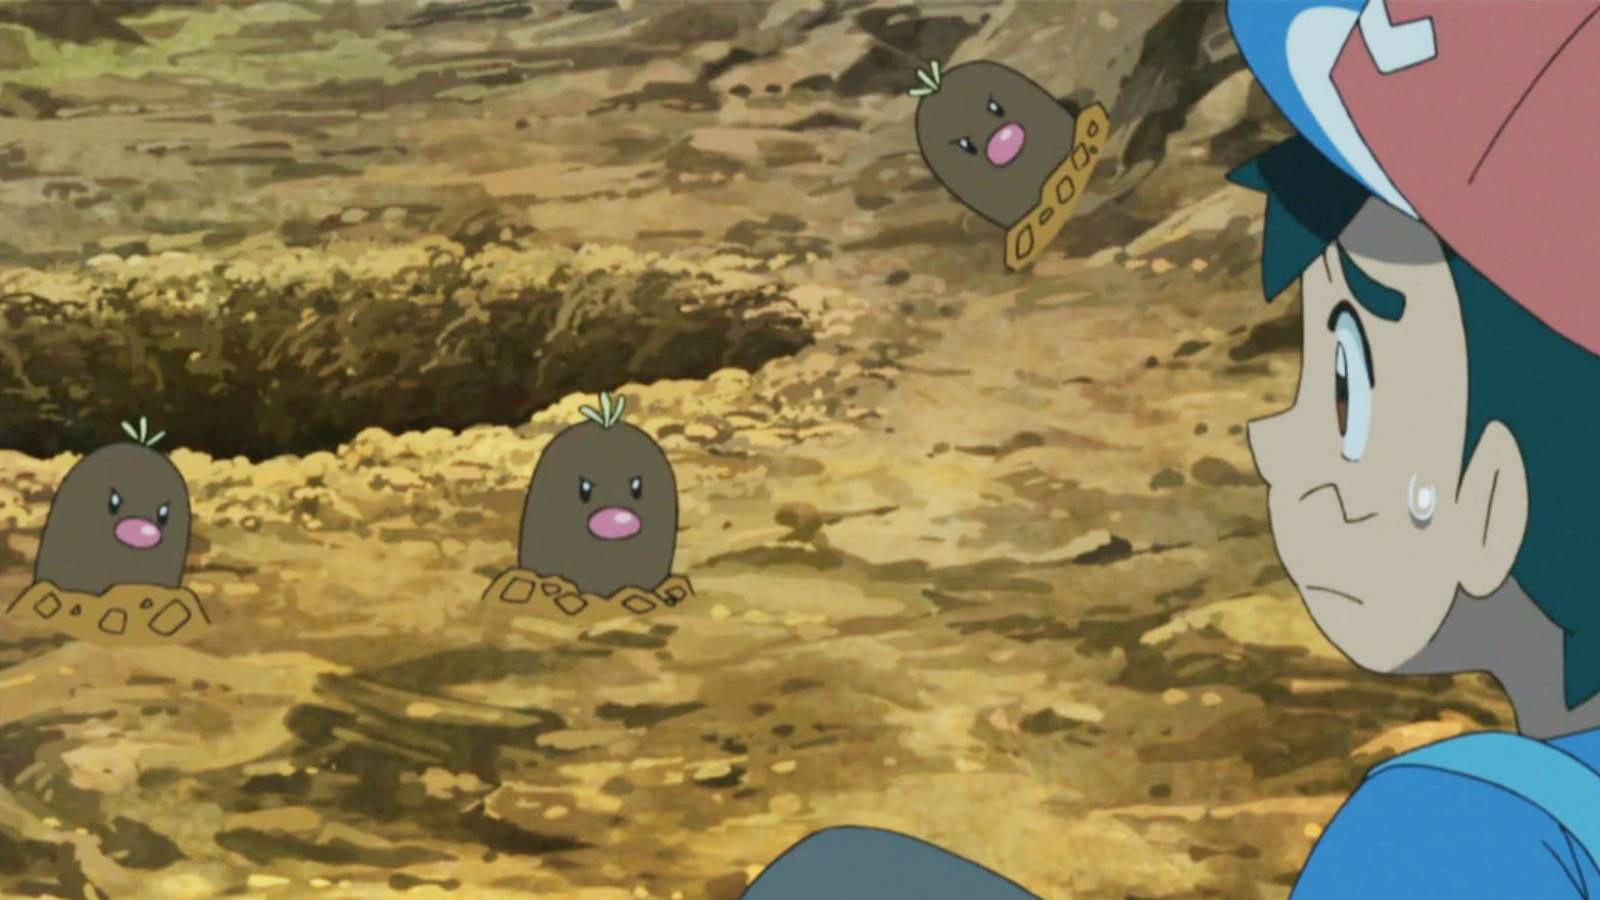 A screenshot from the Pokemon anime shows Ash being surrounded by Diglett